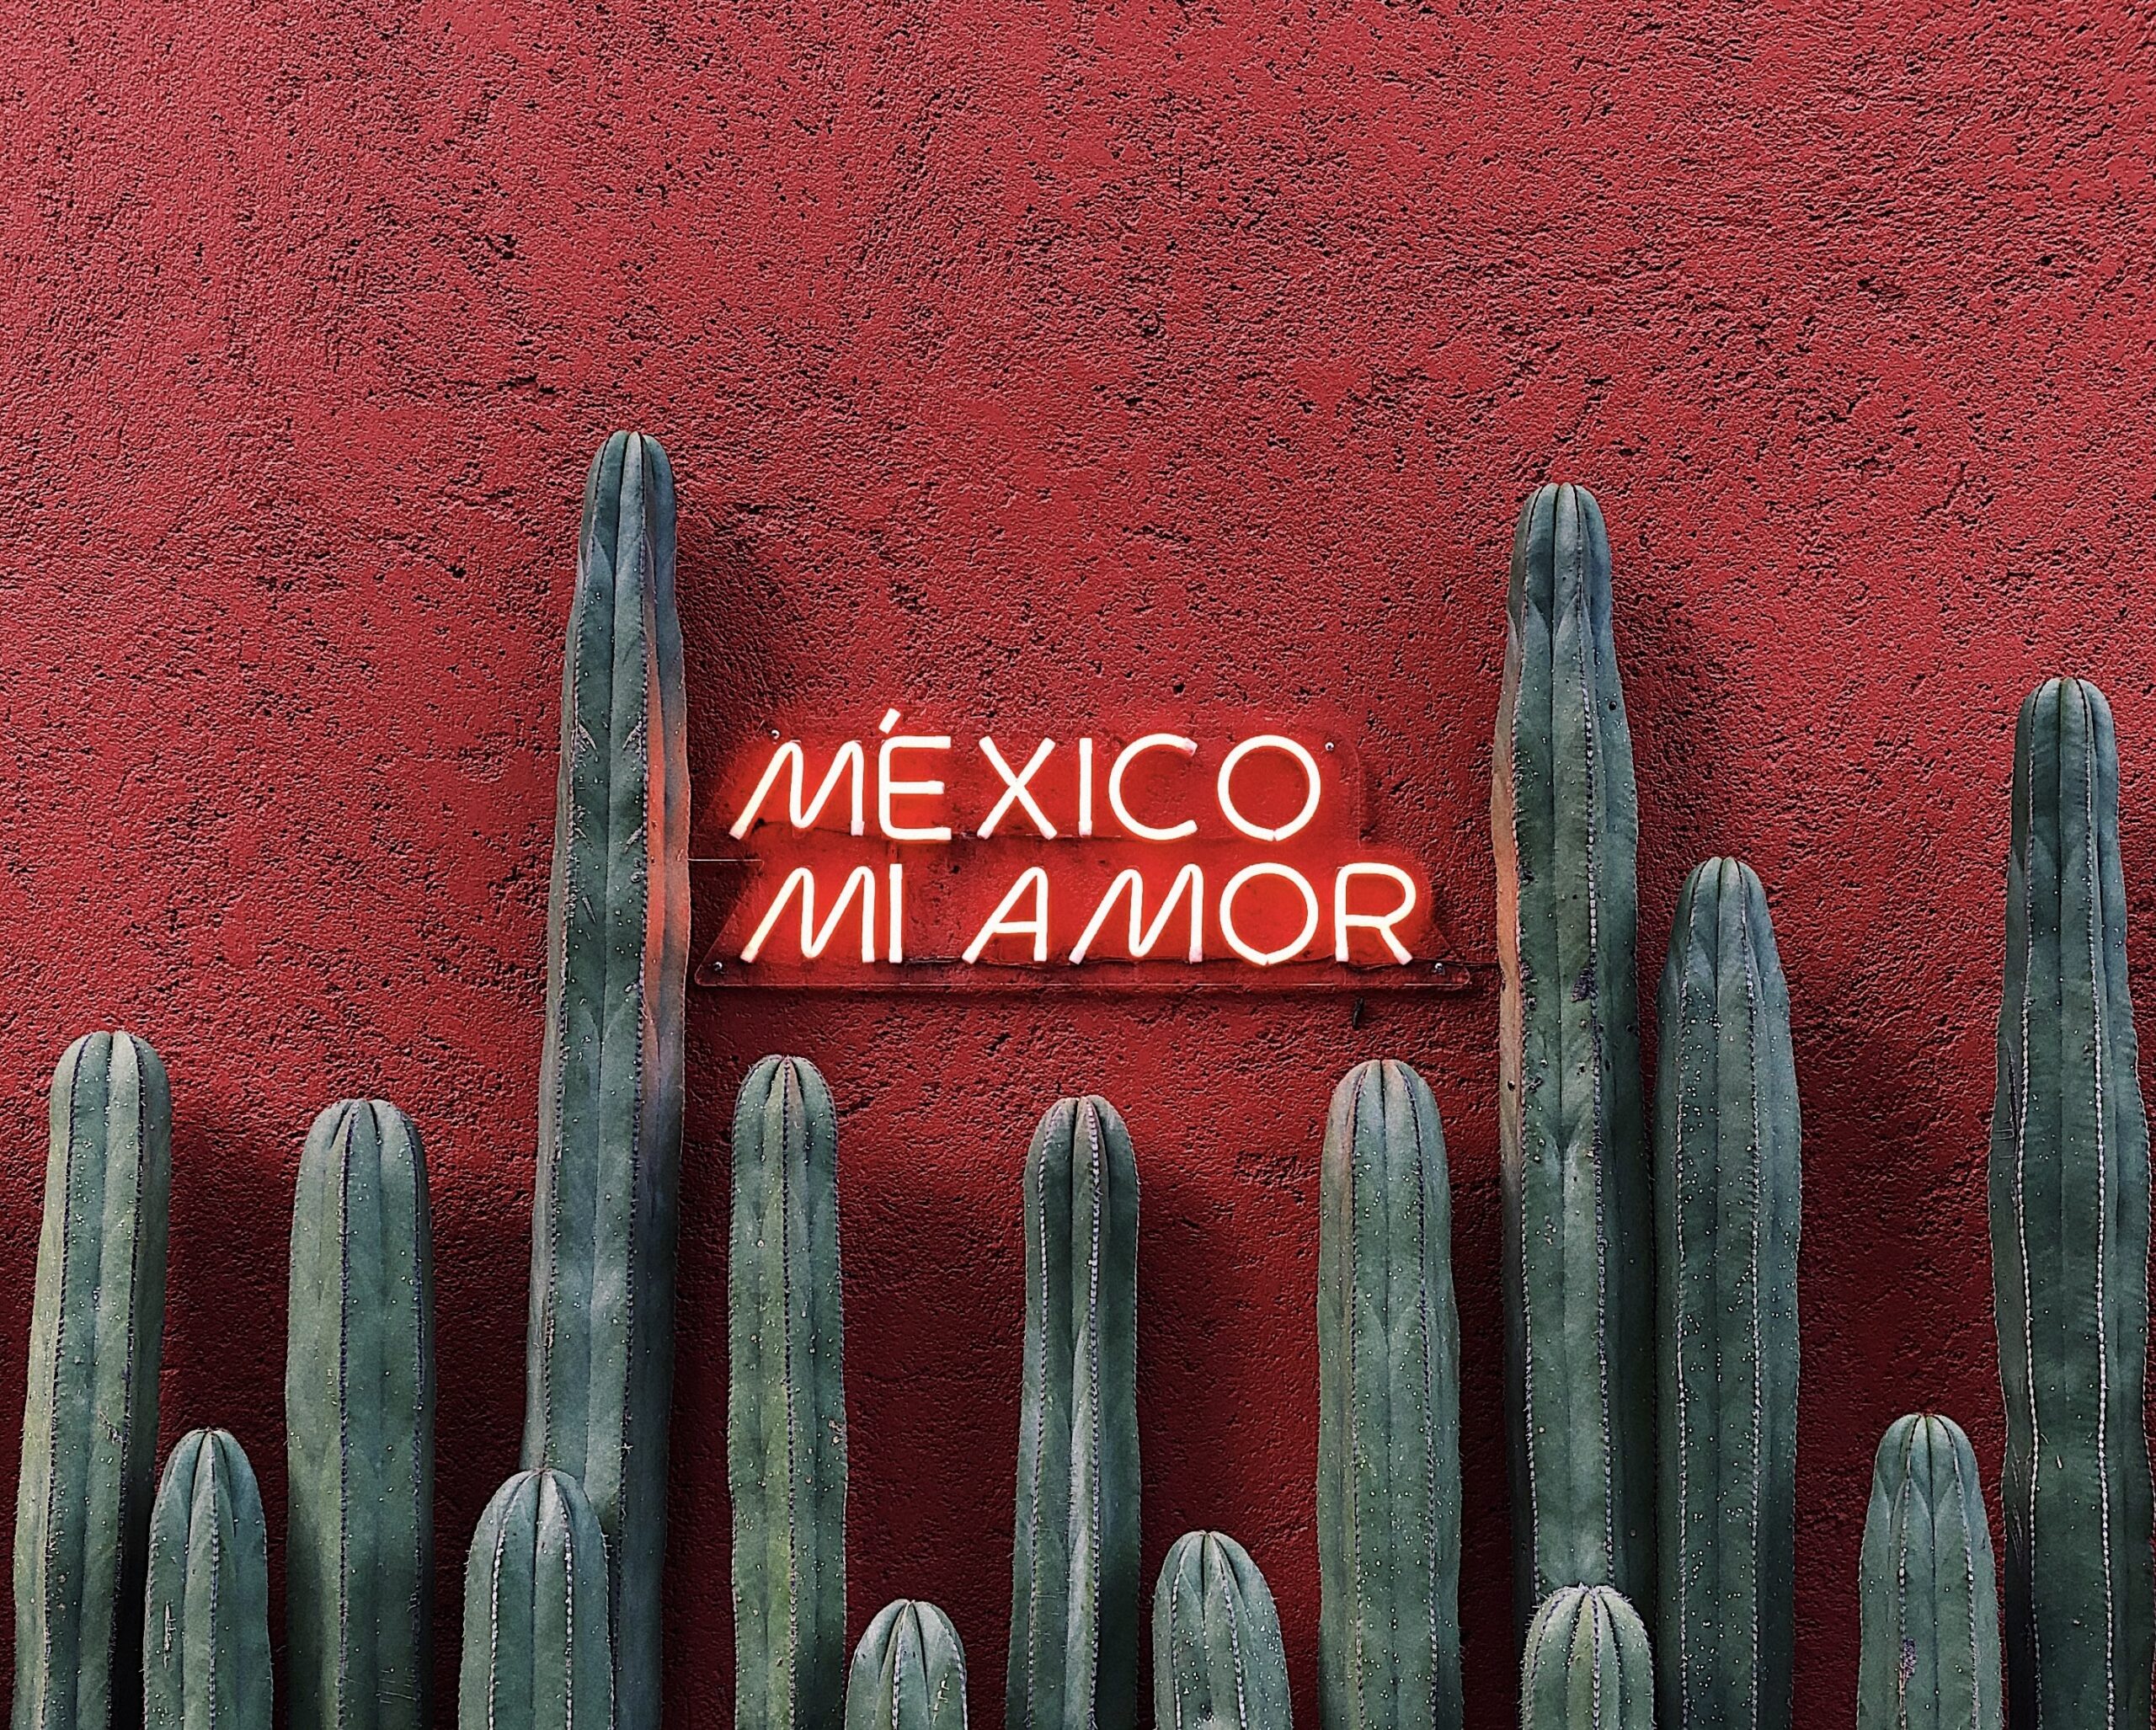 Mexico is a great destination for a sun soaked vacation. Check out these safe locations that all types of travelers can enjoy. 
Pictured: Cacti surrounding a sign in Spanish that says Mexico my love 